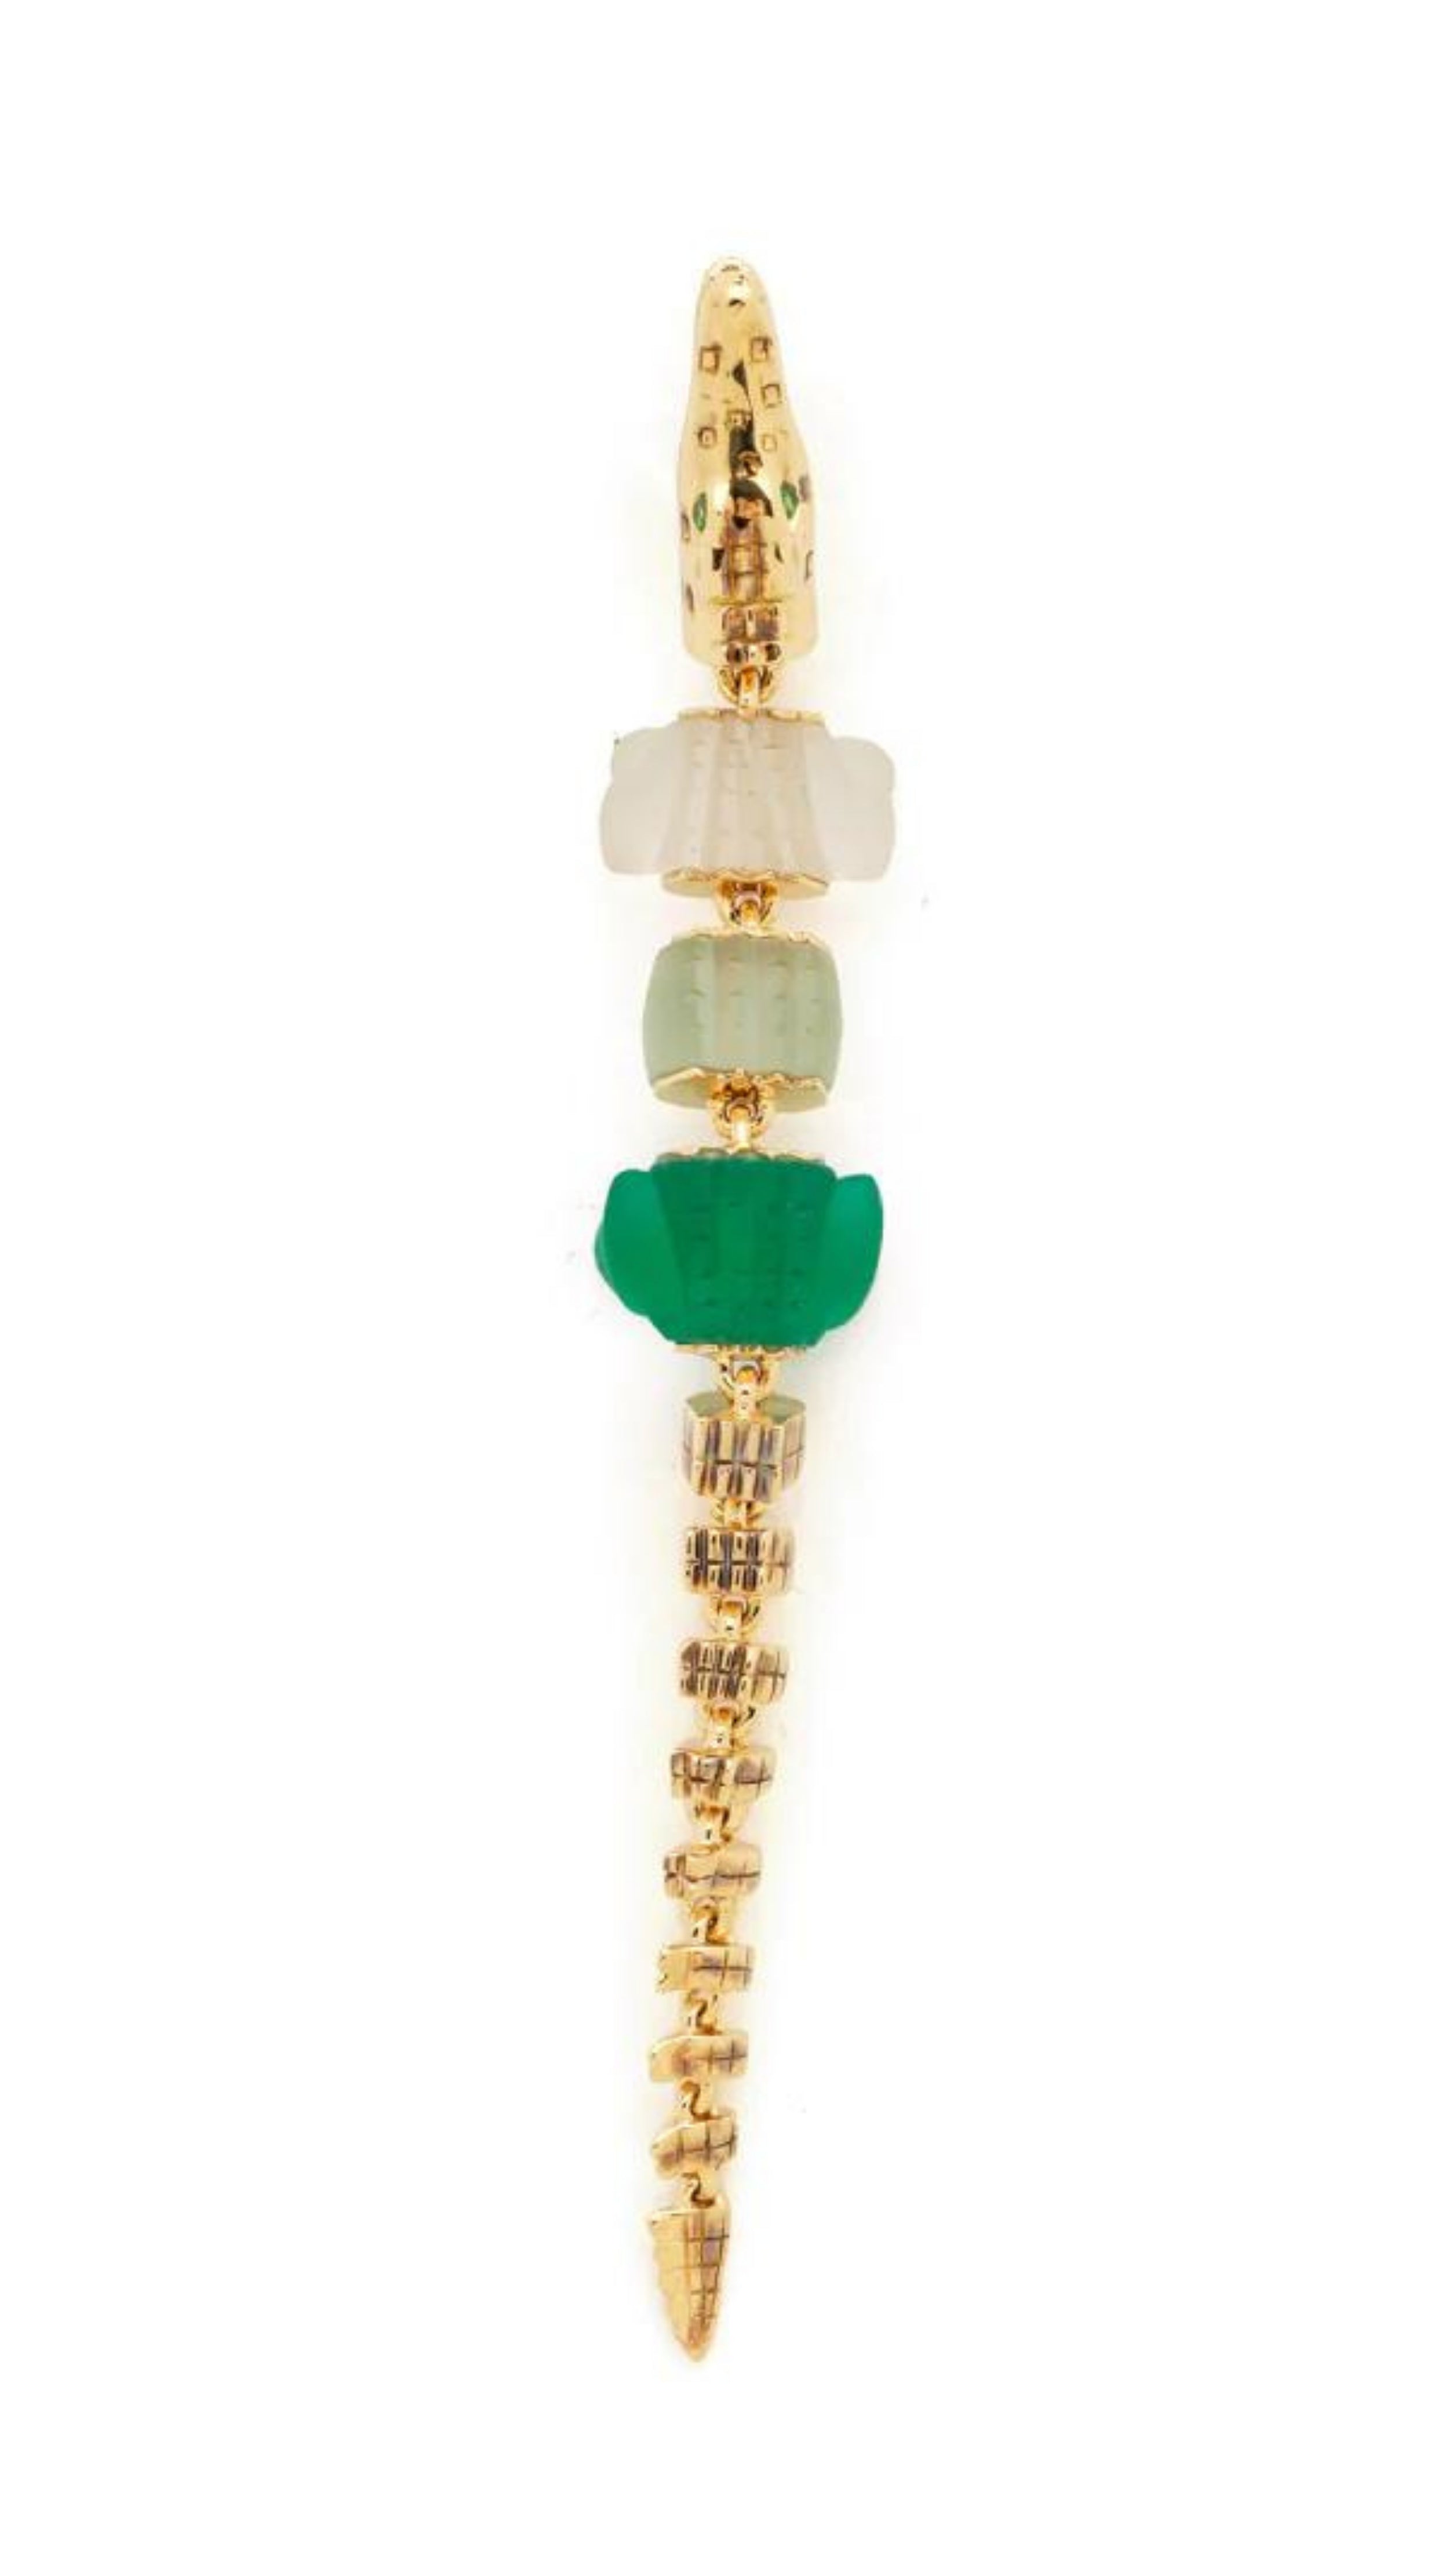 Bibi van der Velden Green Gradient Alligator Vertebrae Bite Earring. Crafted in 18K yellow gold, the alligator&#39;s body is formed by White Quartz, Green Amethyst, Green Agate while the head and tail are in solid 18K gold.  Photo shows earring from above.